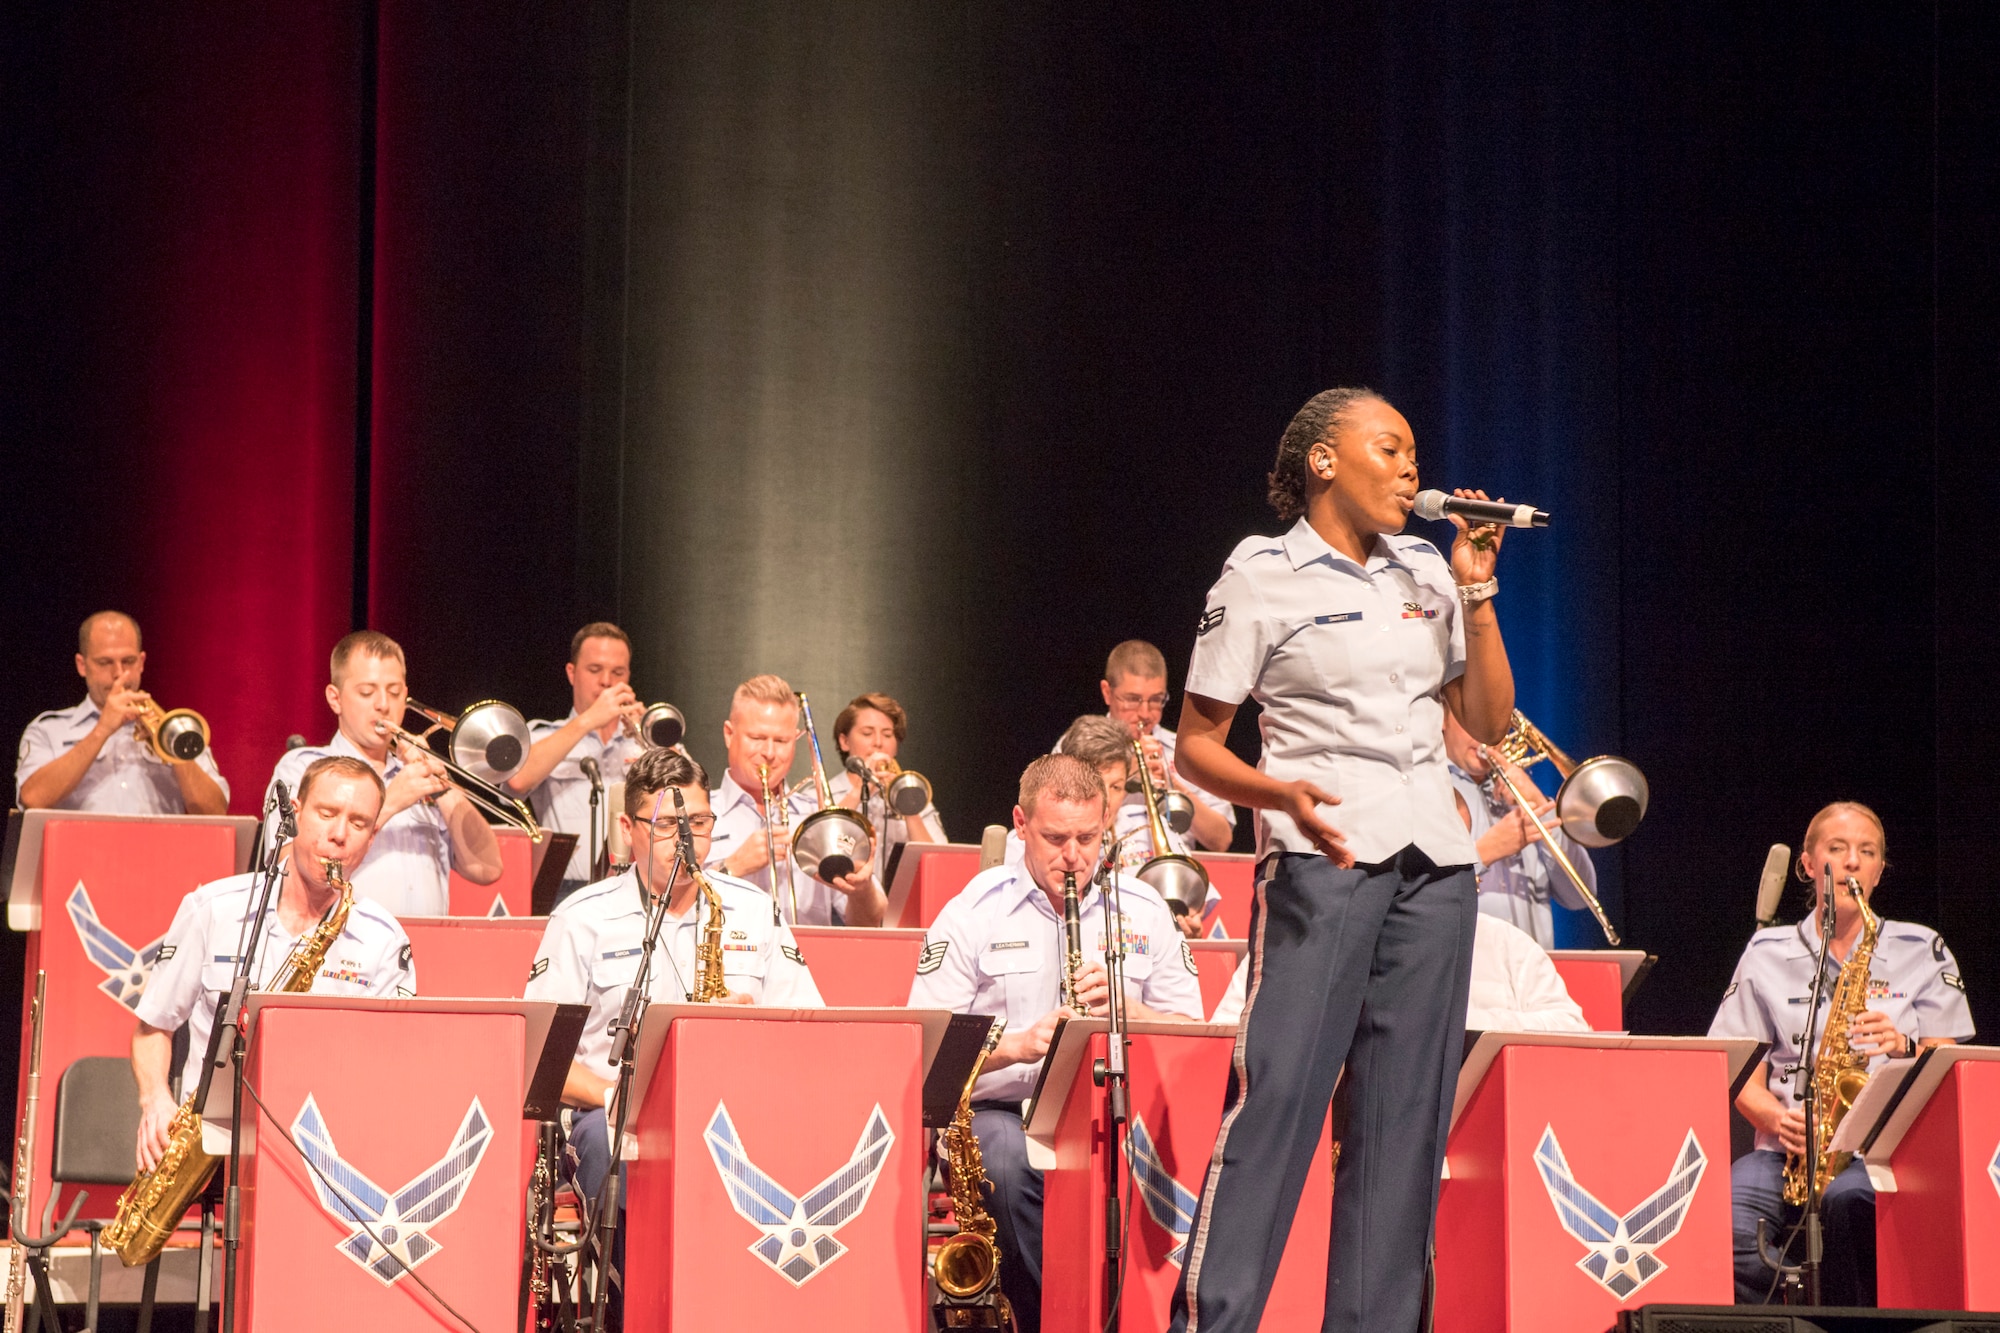 Airman 1st Class, Smartt, U.S. Air Force Band of Flight vocalist, sings during a concert at the Honeywell Center in Wabash, Indiana Sept. 10, 2019. The Band of Flight partnered with the Band of Mid-America to bring back the ‘big band jazz feel’. (U.S. Air Force photo/Master Sgt. Ben Mota)